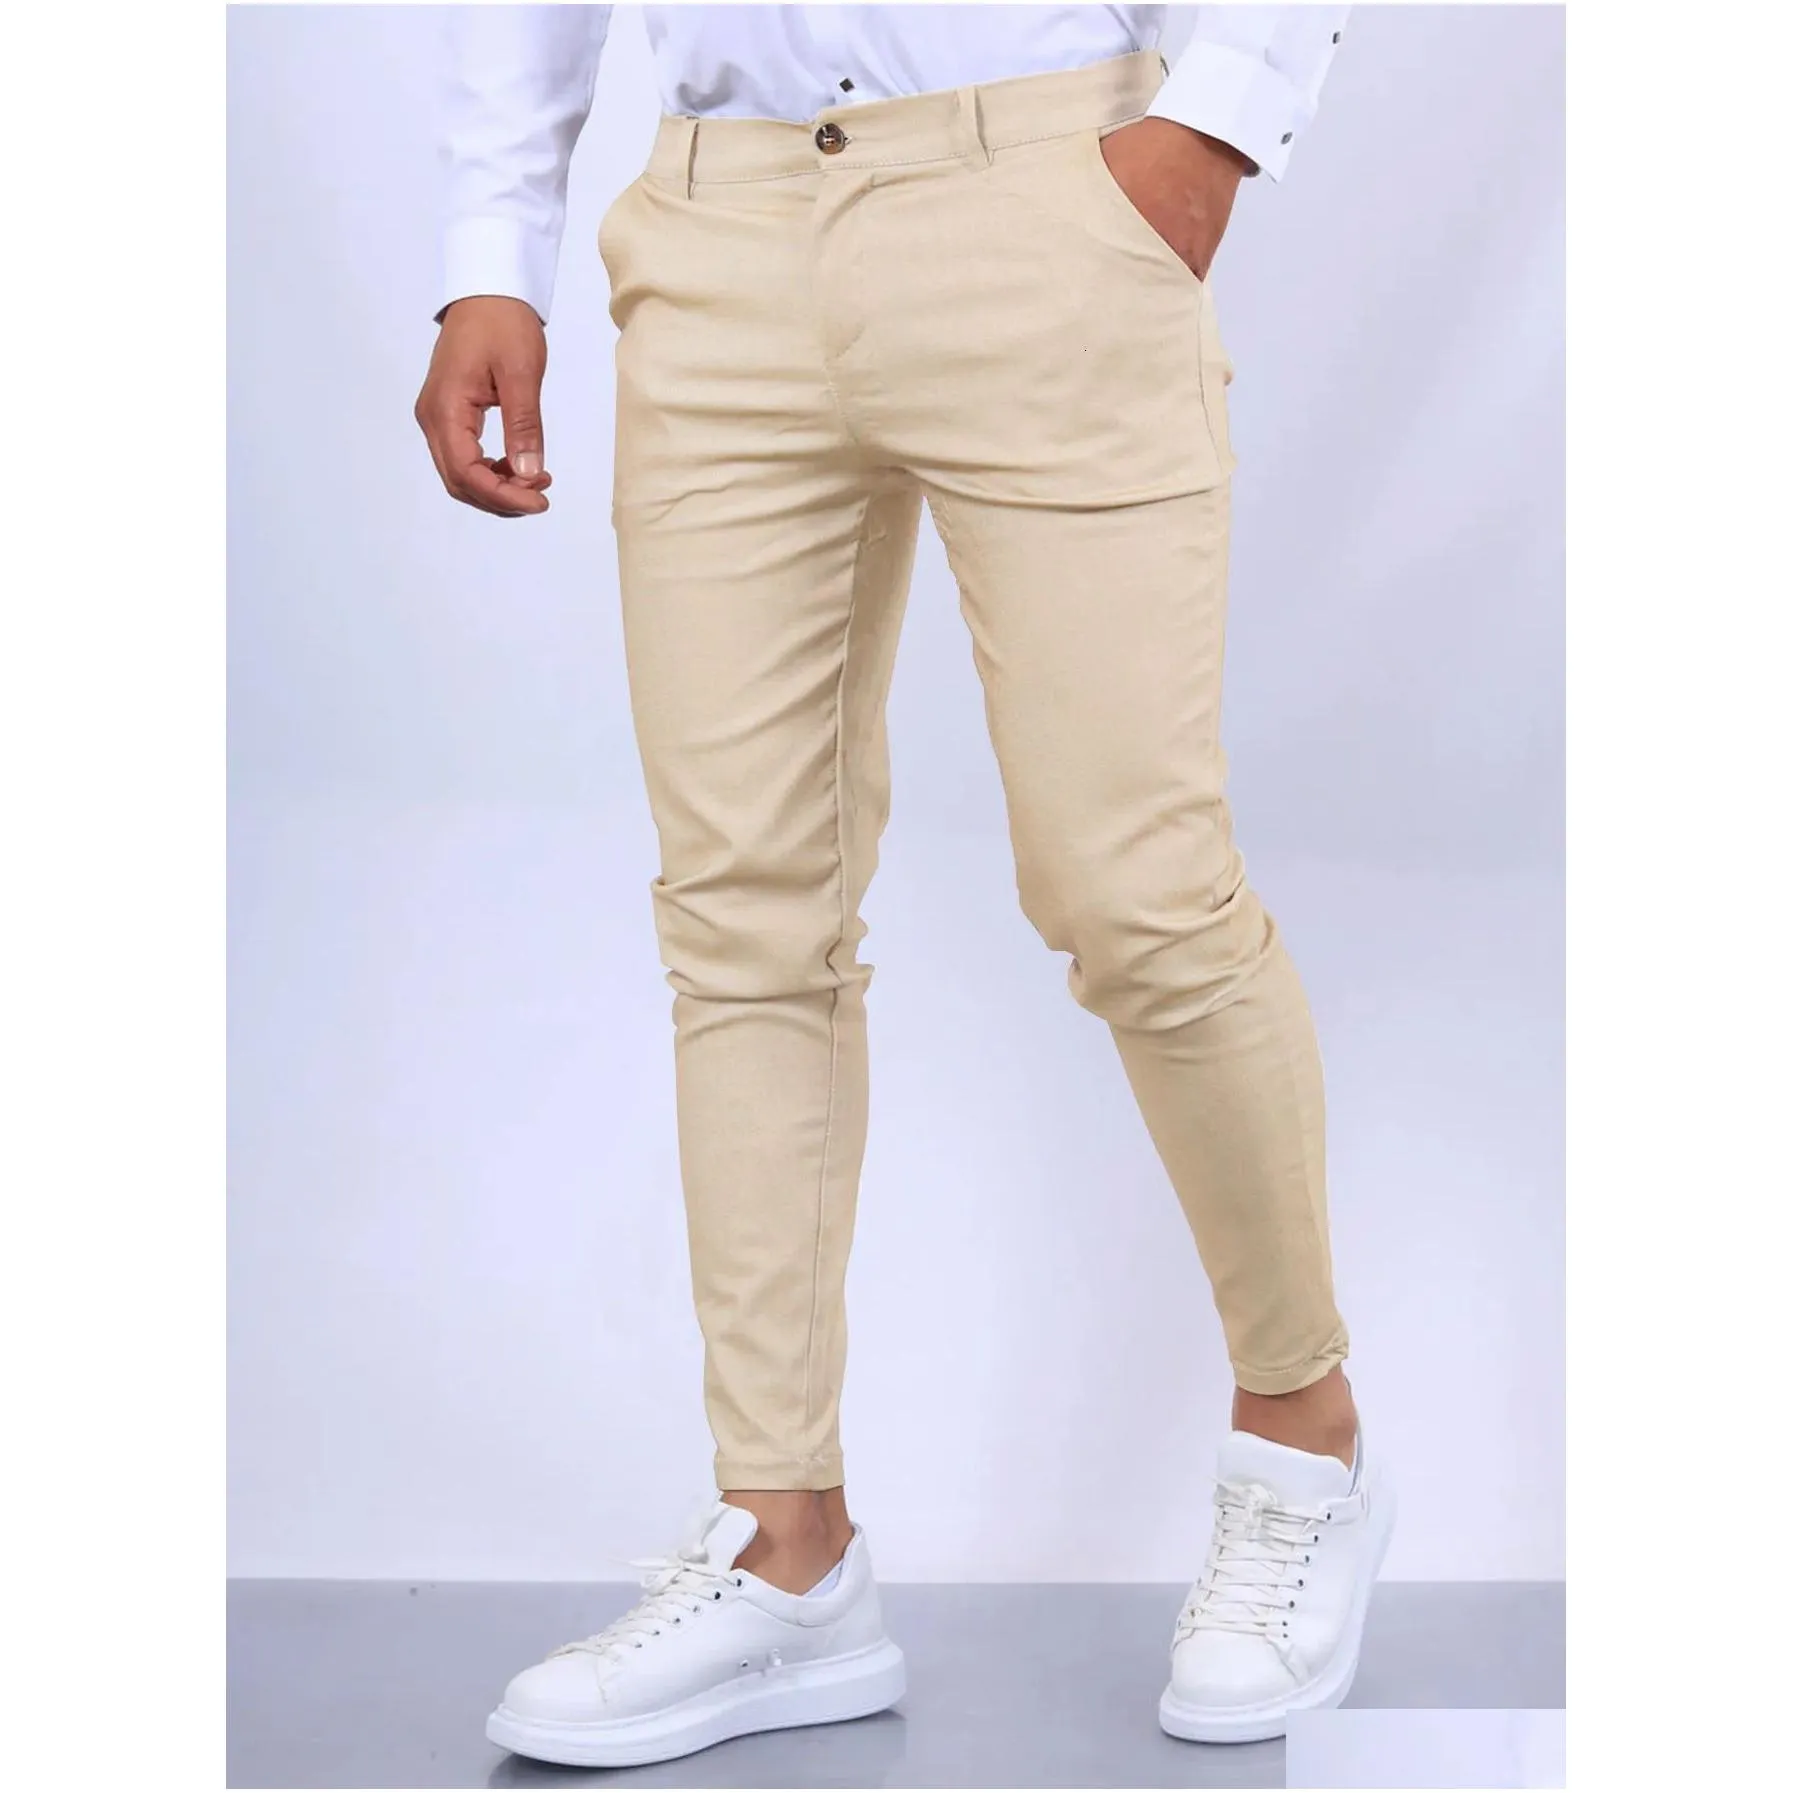 Men`S Pants Mens Solid Color Fashion Europe And The United States England Wind Calf Four Seasons Comfortable Casual Formal Pant 23101 Dhnpi